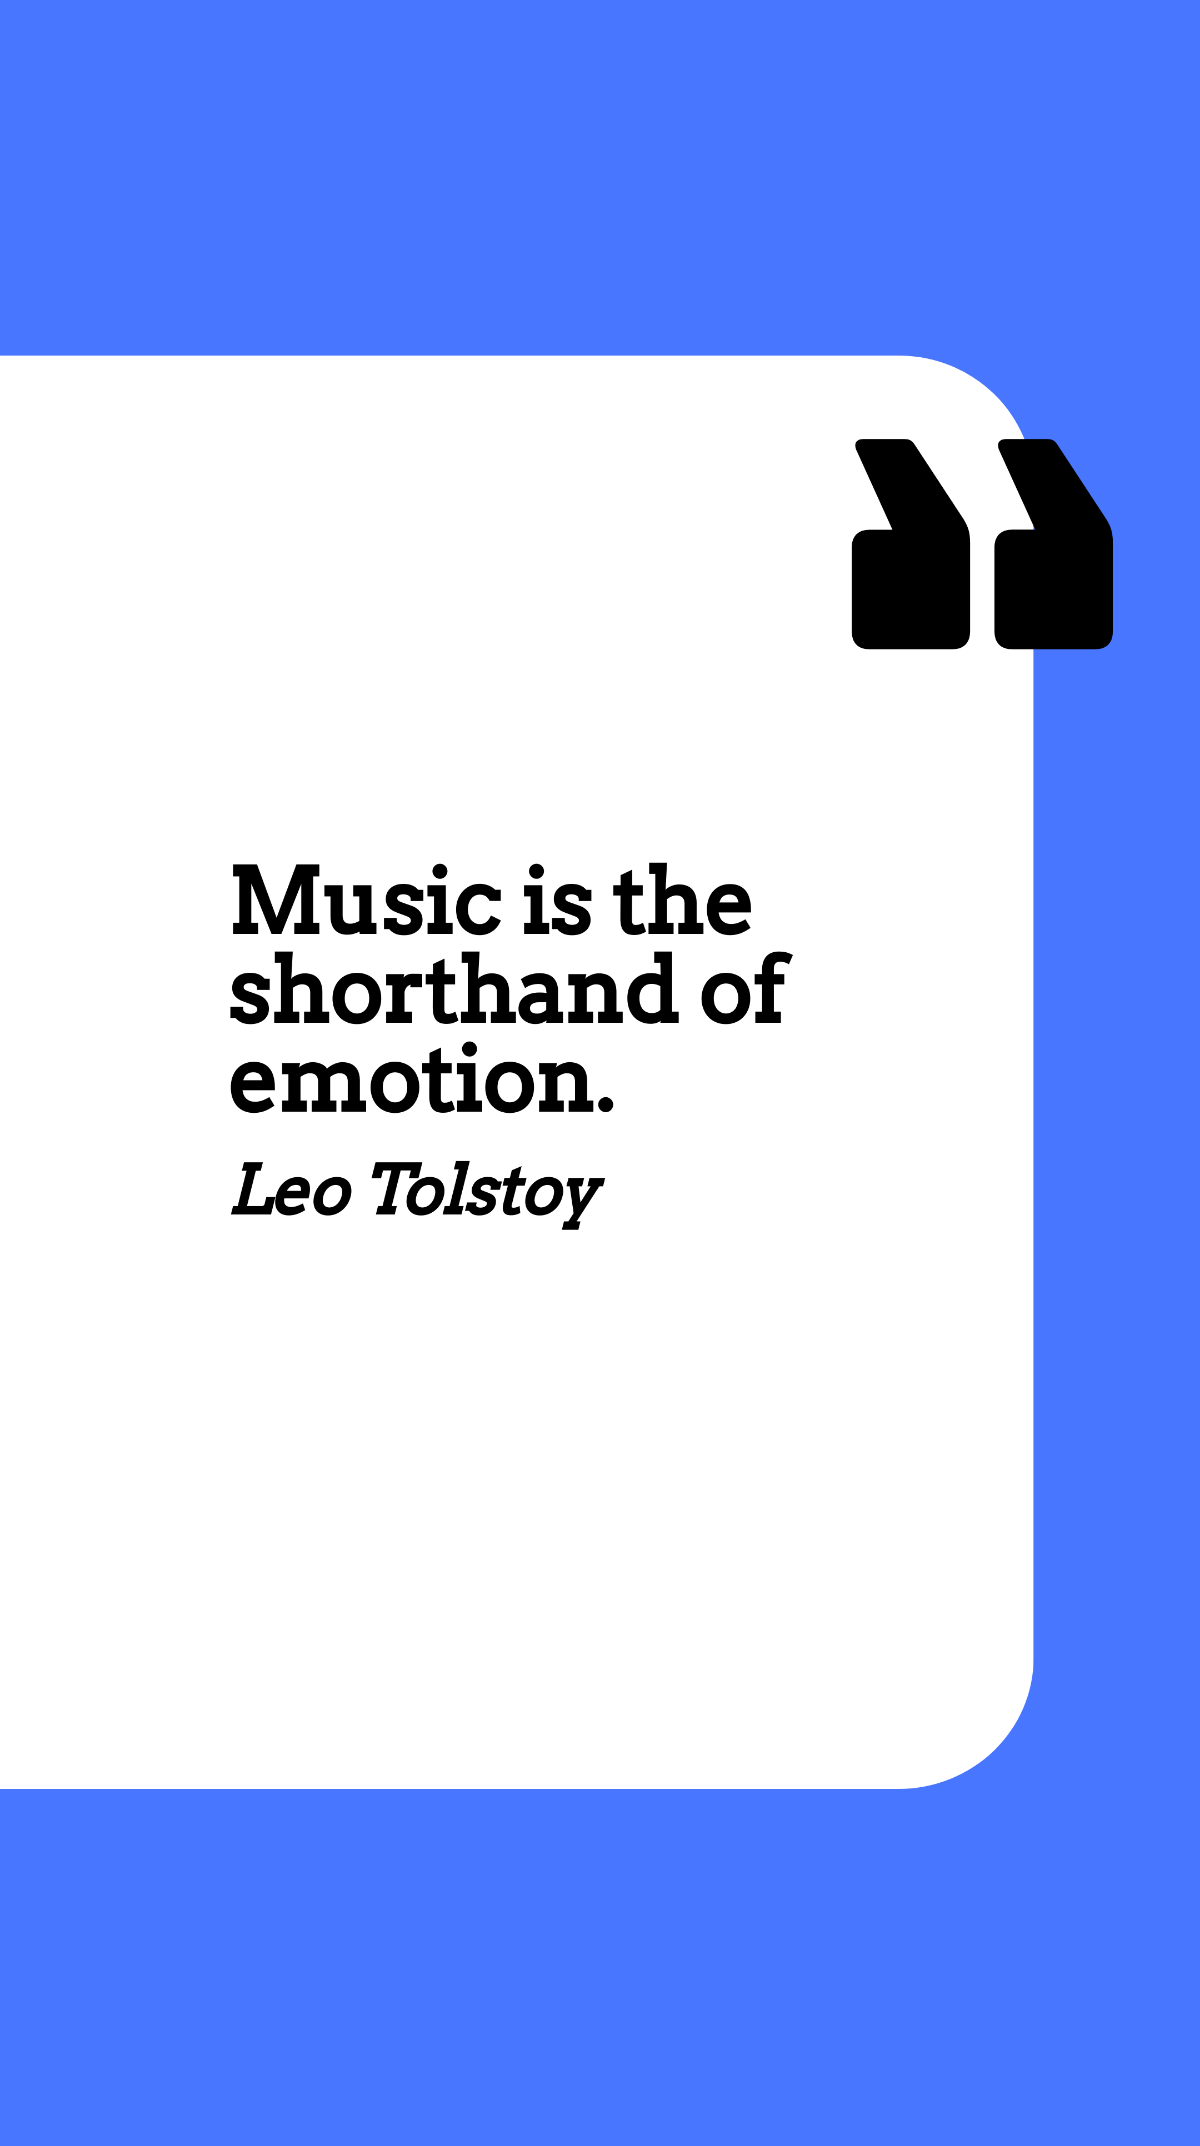 Leo Tolstoy - Music is the shorthand of emotion. Template